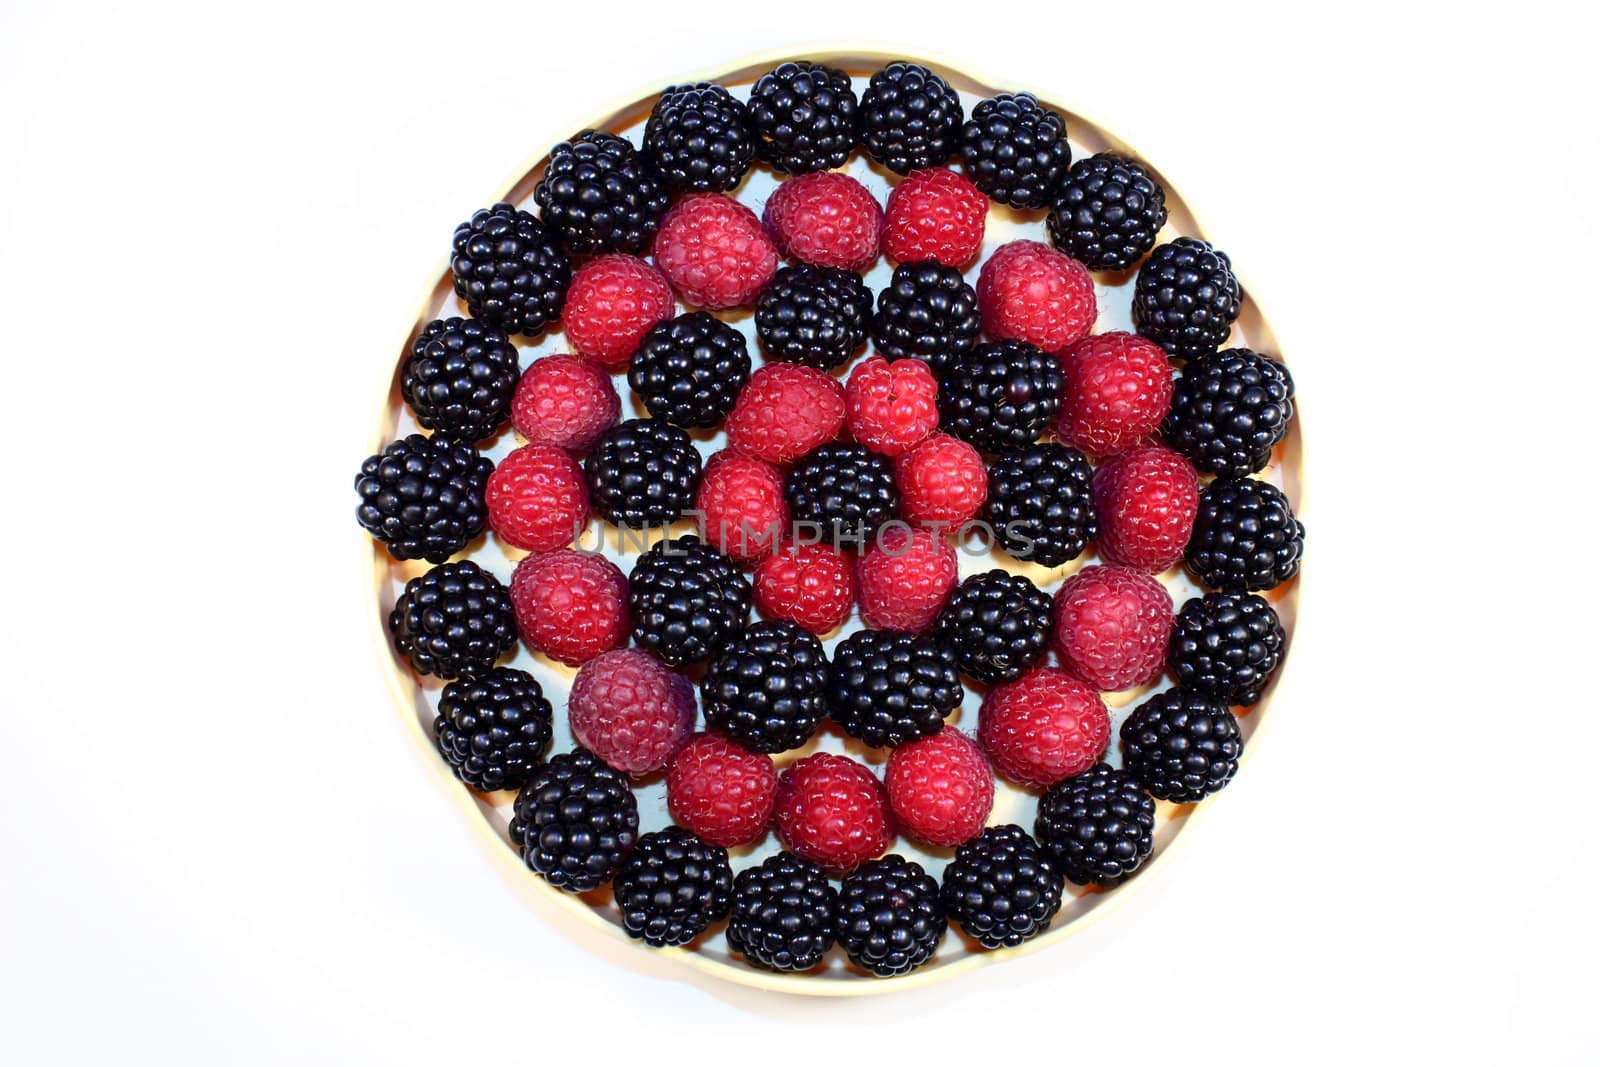 Fresh raspberries and blackberries in a little dish, ordered in a circle